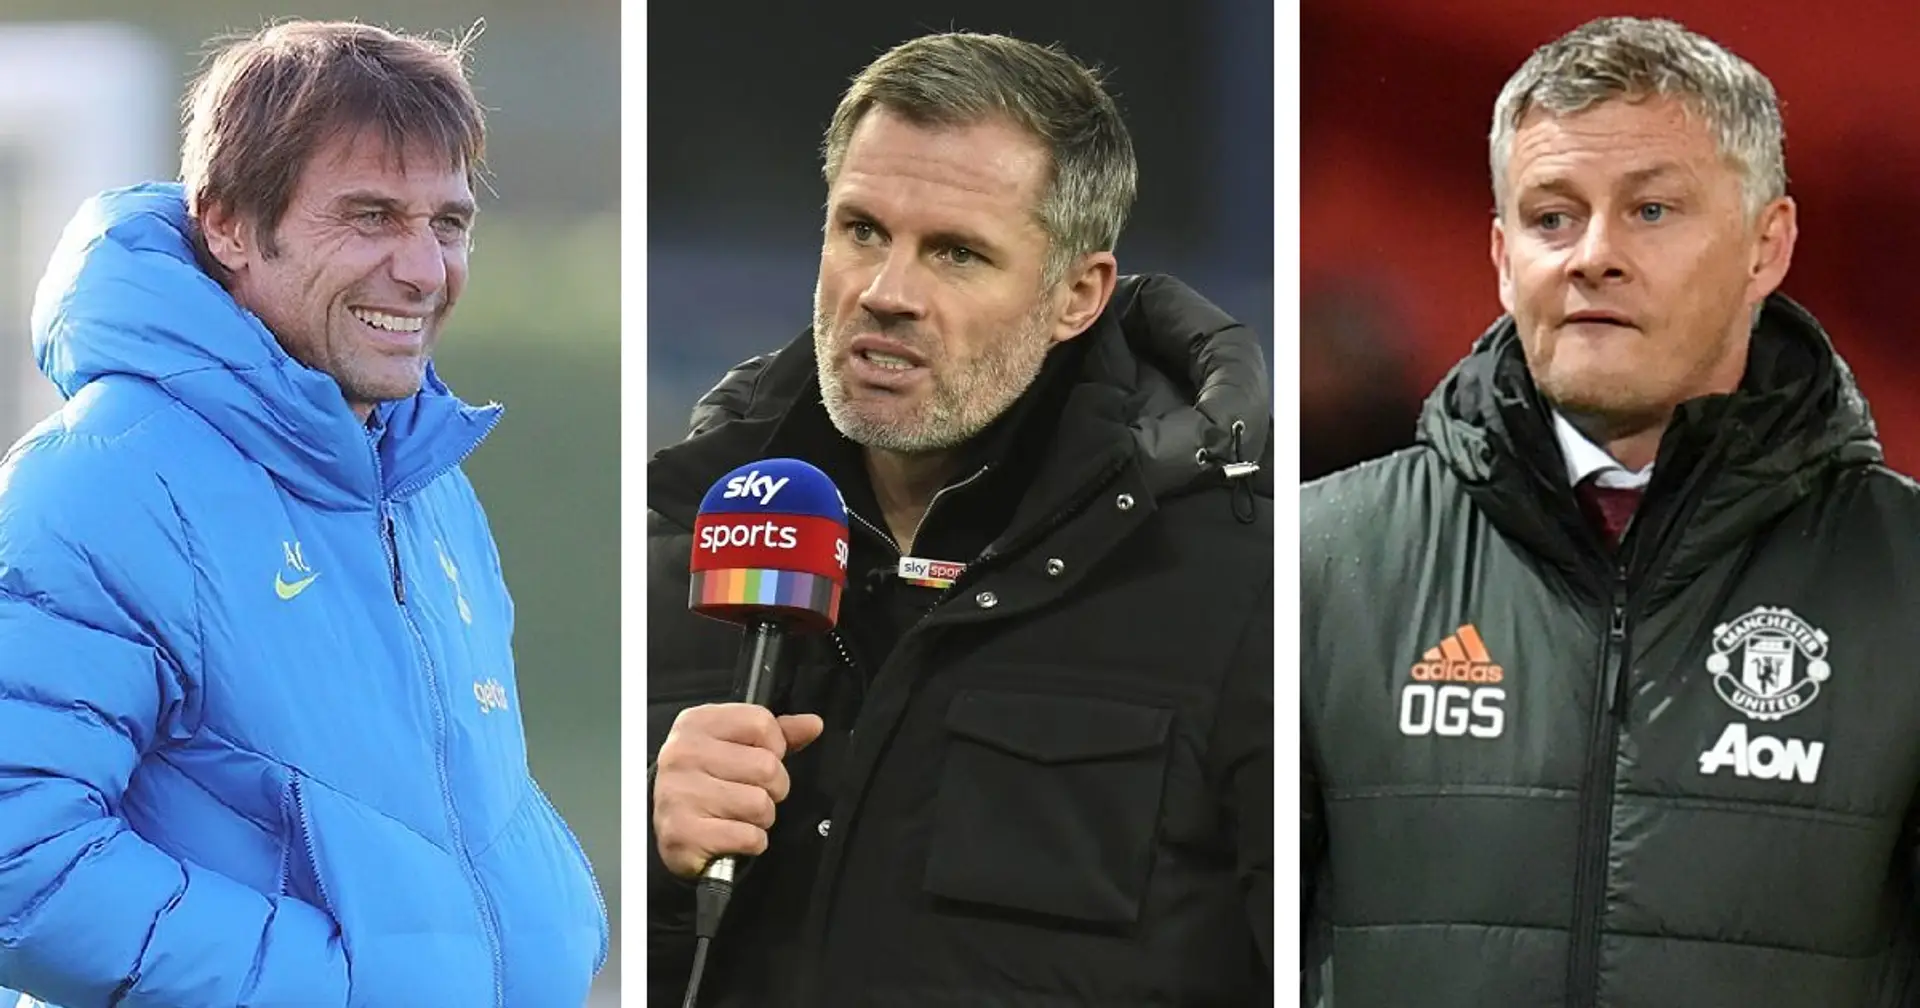 'Conte, Pochettino, Tuchel': Jamie Carragher slams Man United for missing out on 'brilliant coaches'